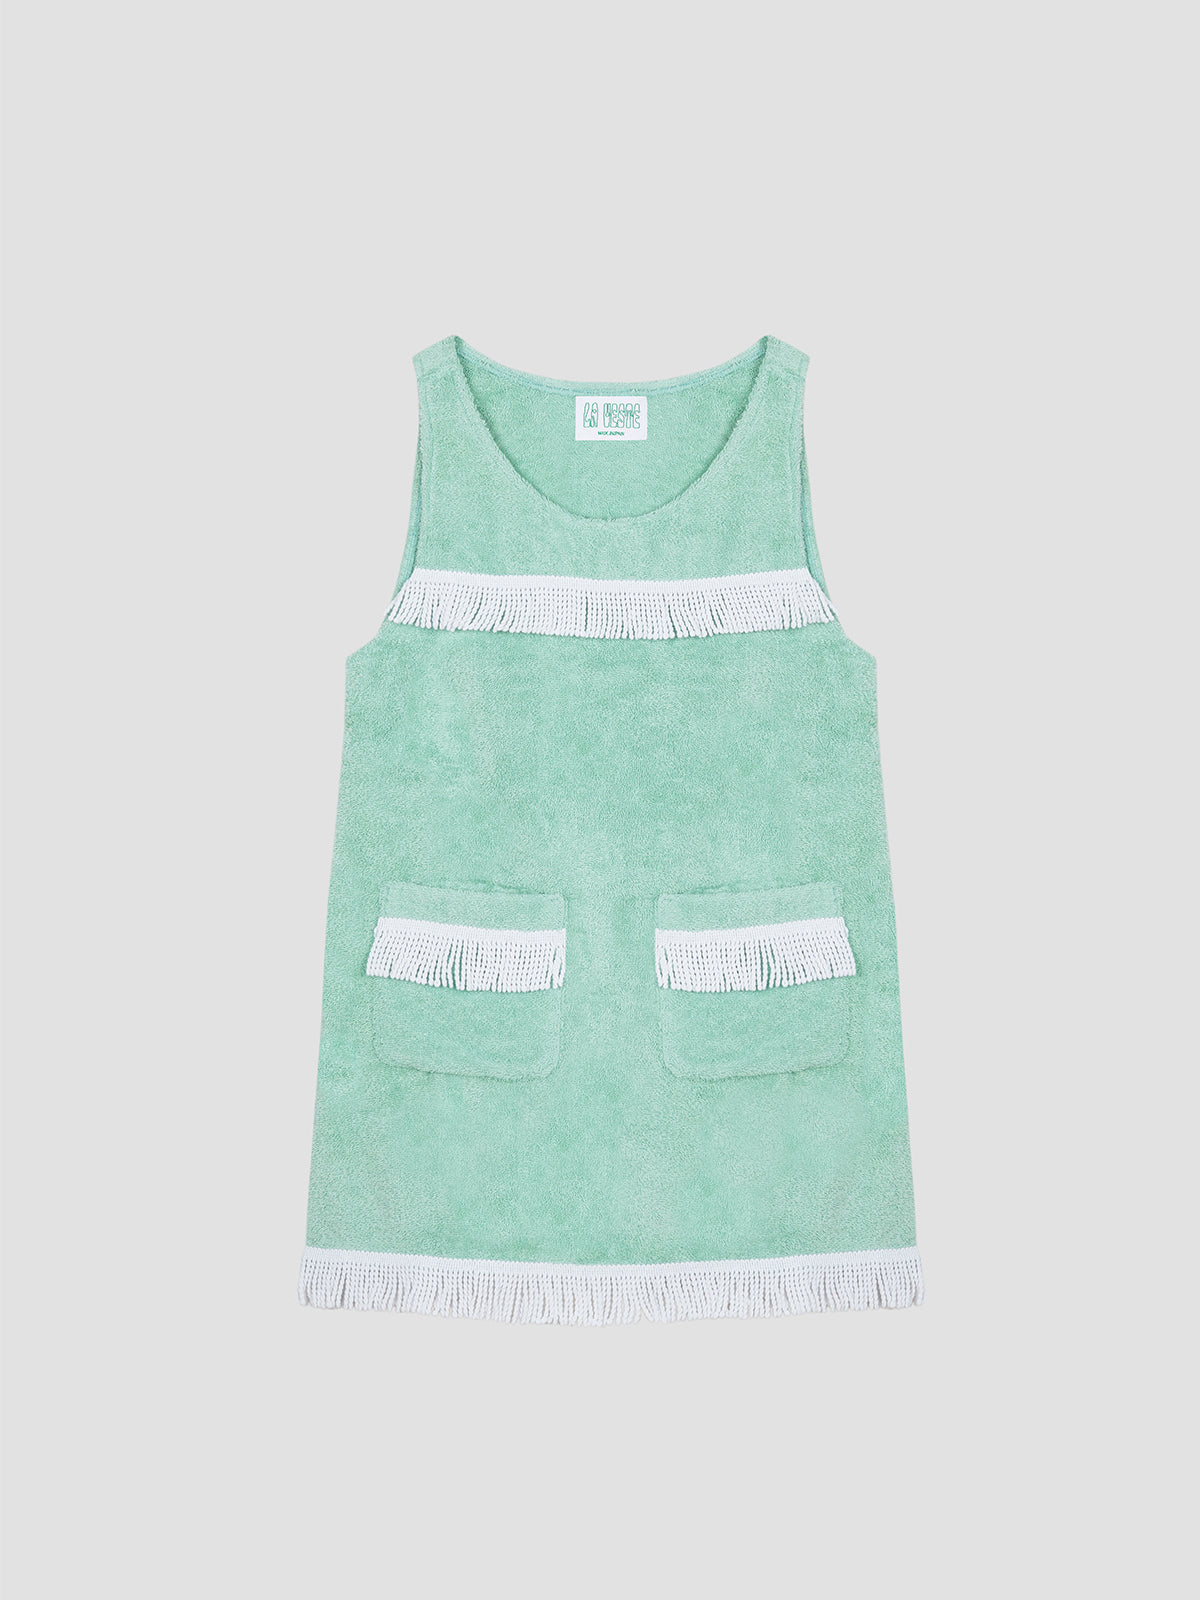 Colour: Green Pool/White.   Short towel dress made in green pool cotton, with white fringed details.   Regular fit. Short length. Two front pockets with white fringes.  Crew neck. White fringe detail on the chest and at the bottom.